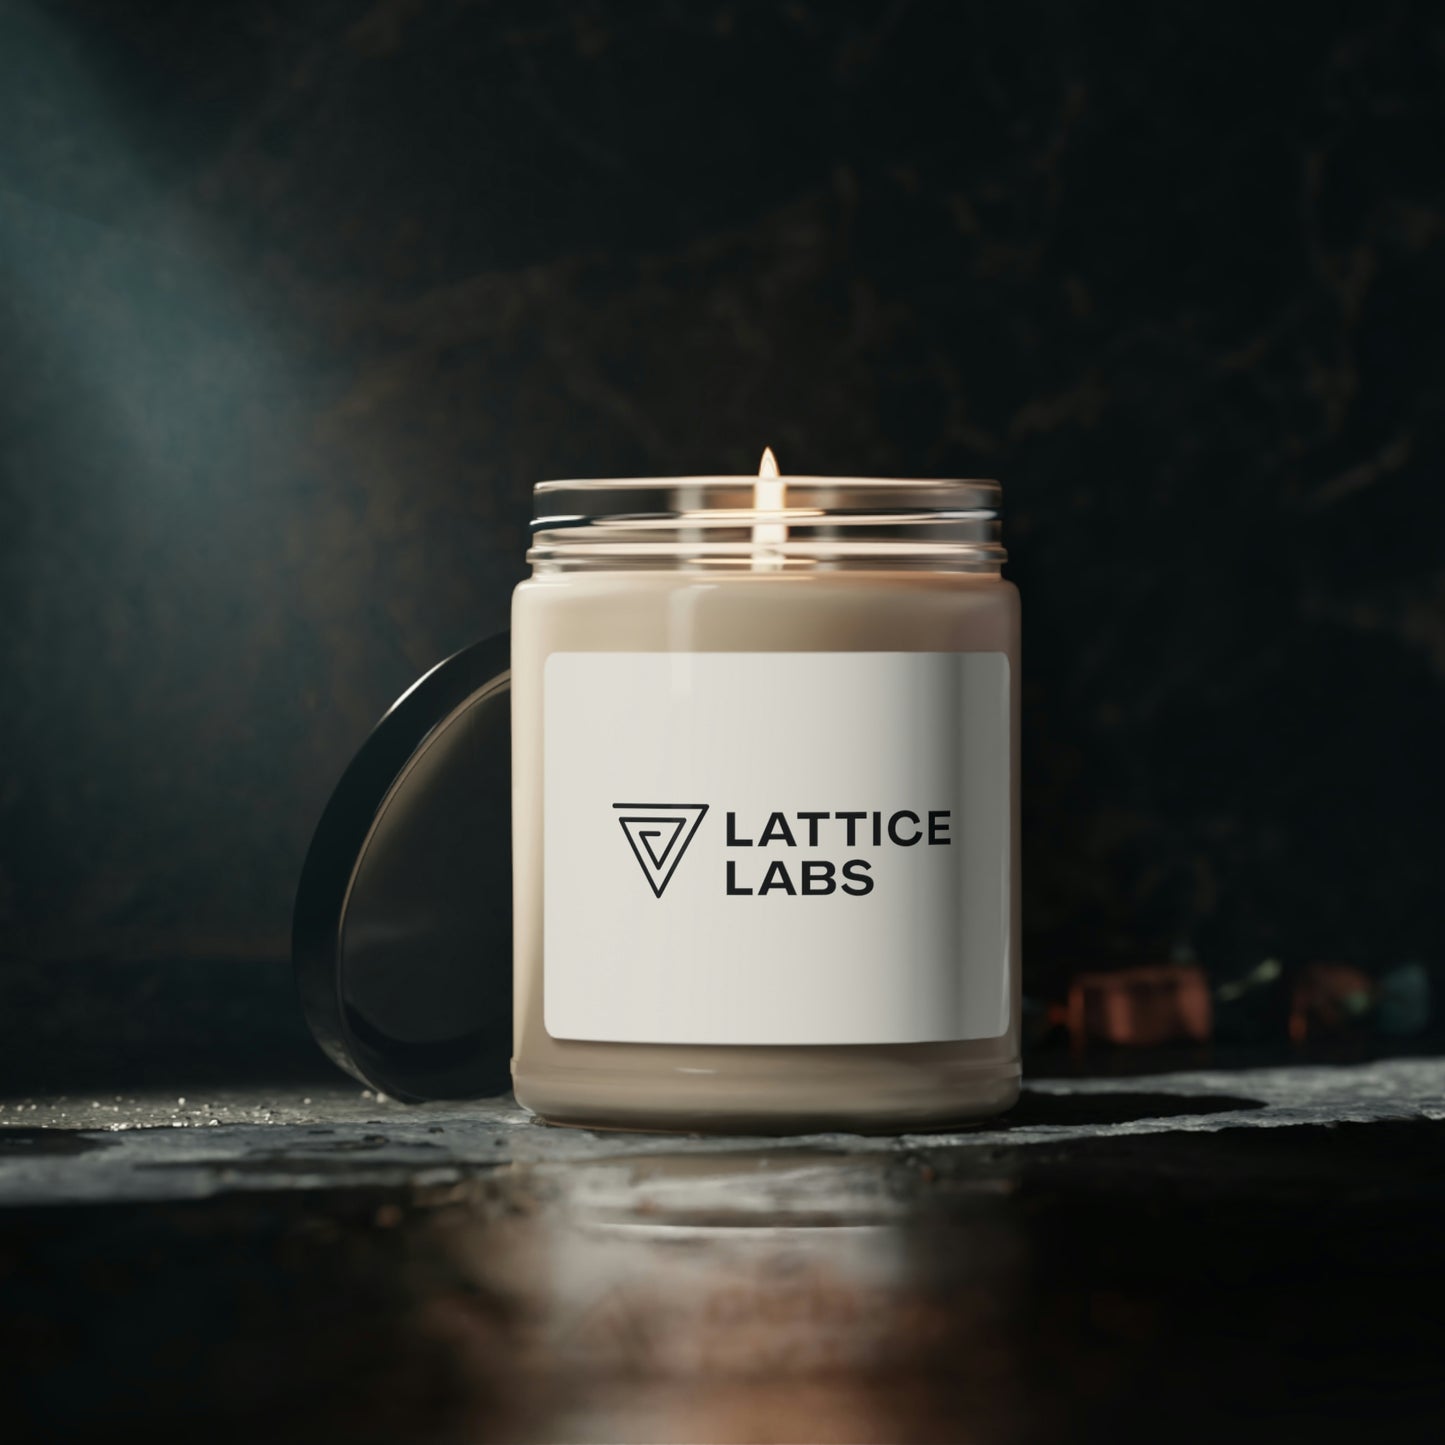 Lattice Labs Scented Soy Candle, 9oz